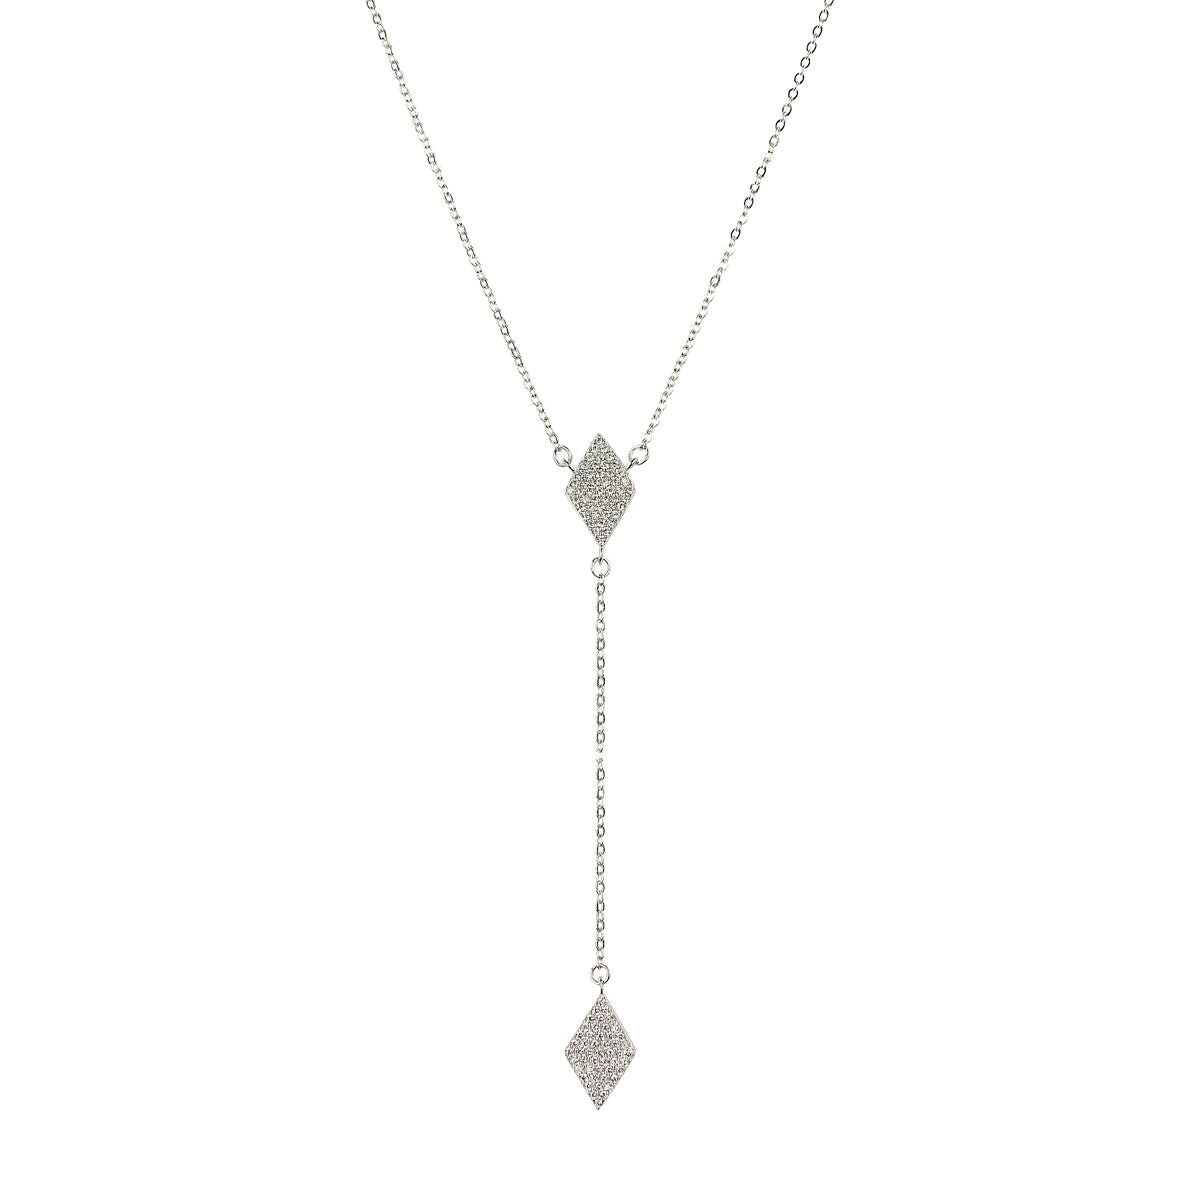 KIRSTY STERLING SILVER NECKLACE